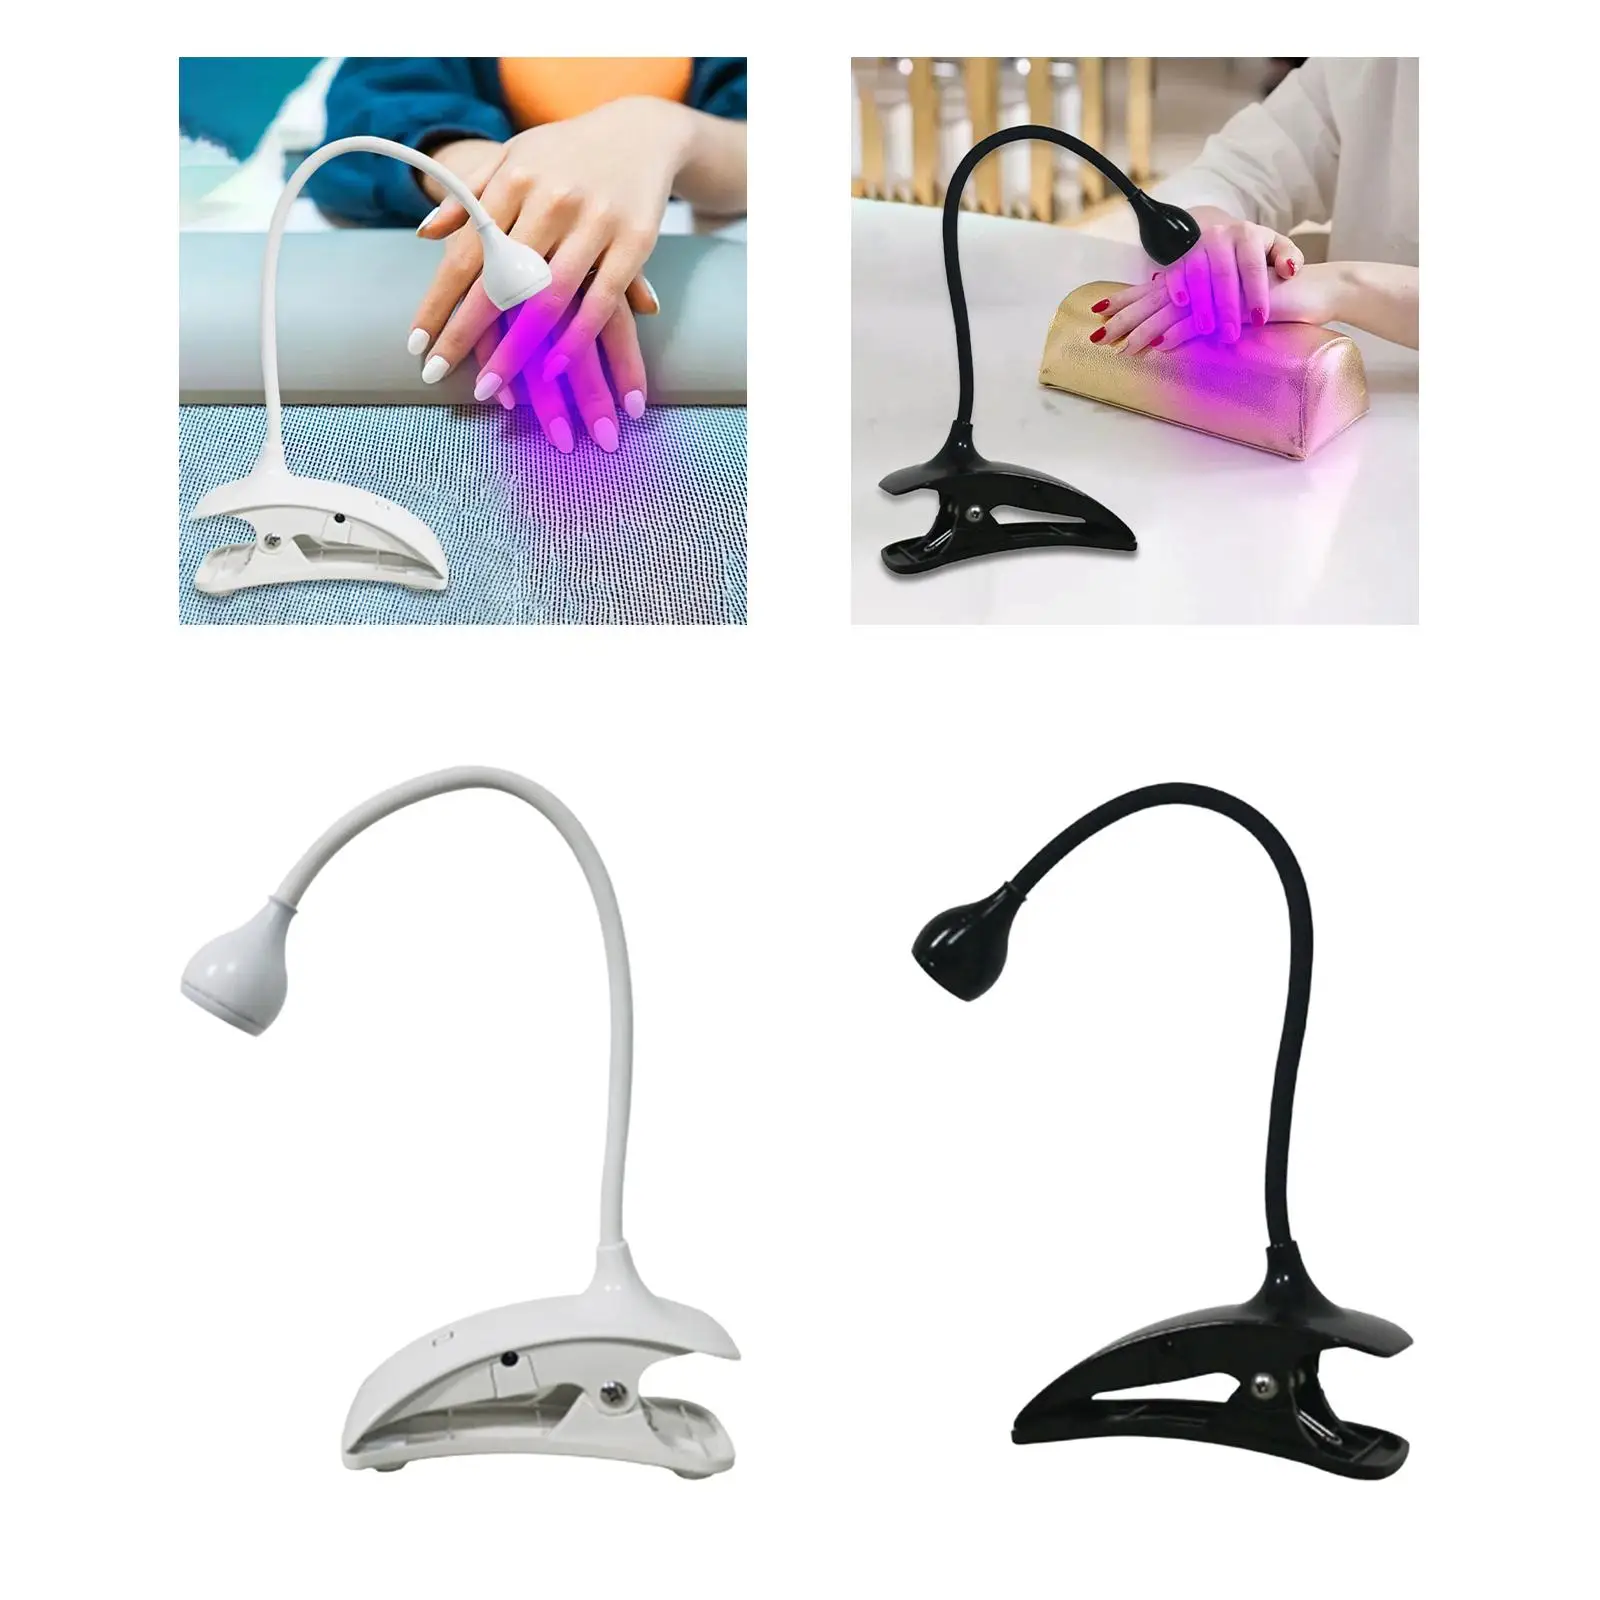 Nail Polish Curing Light usb Charging Bendable 360 Degree Adjustable Compact Nail Dryer Lamp for Starters Beginners